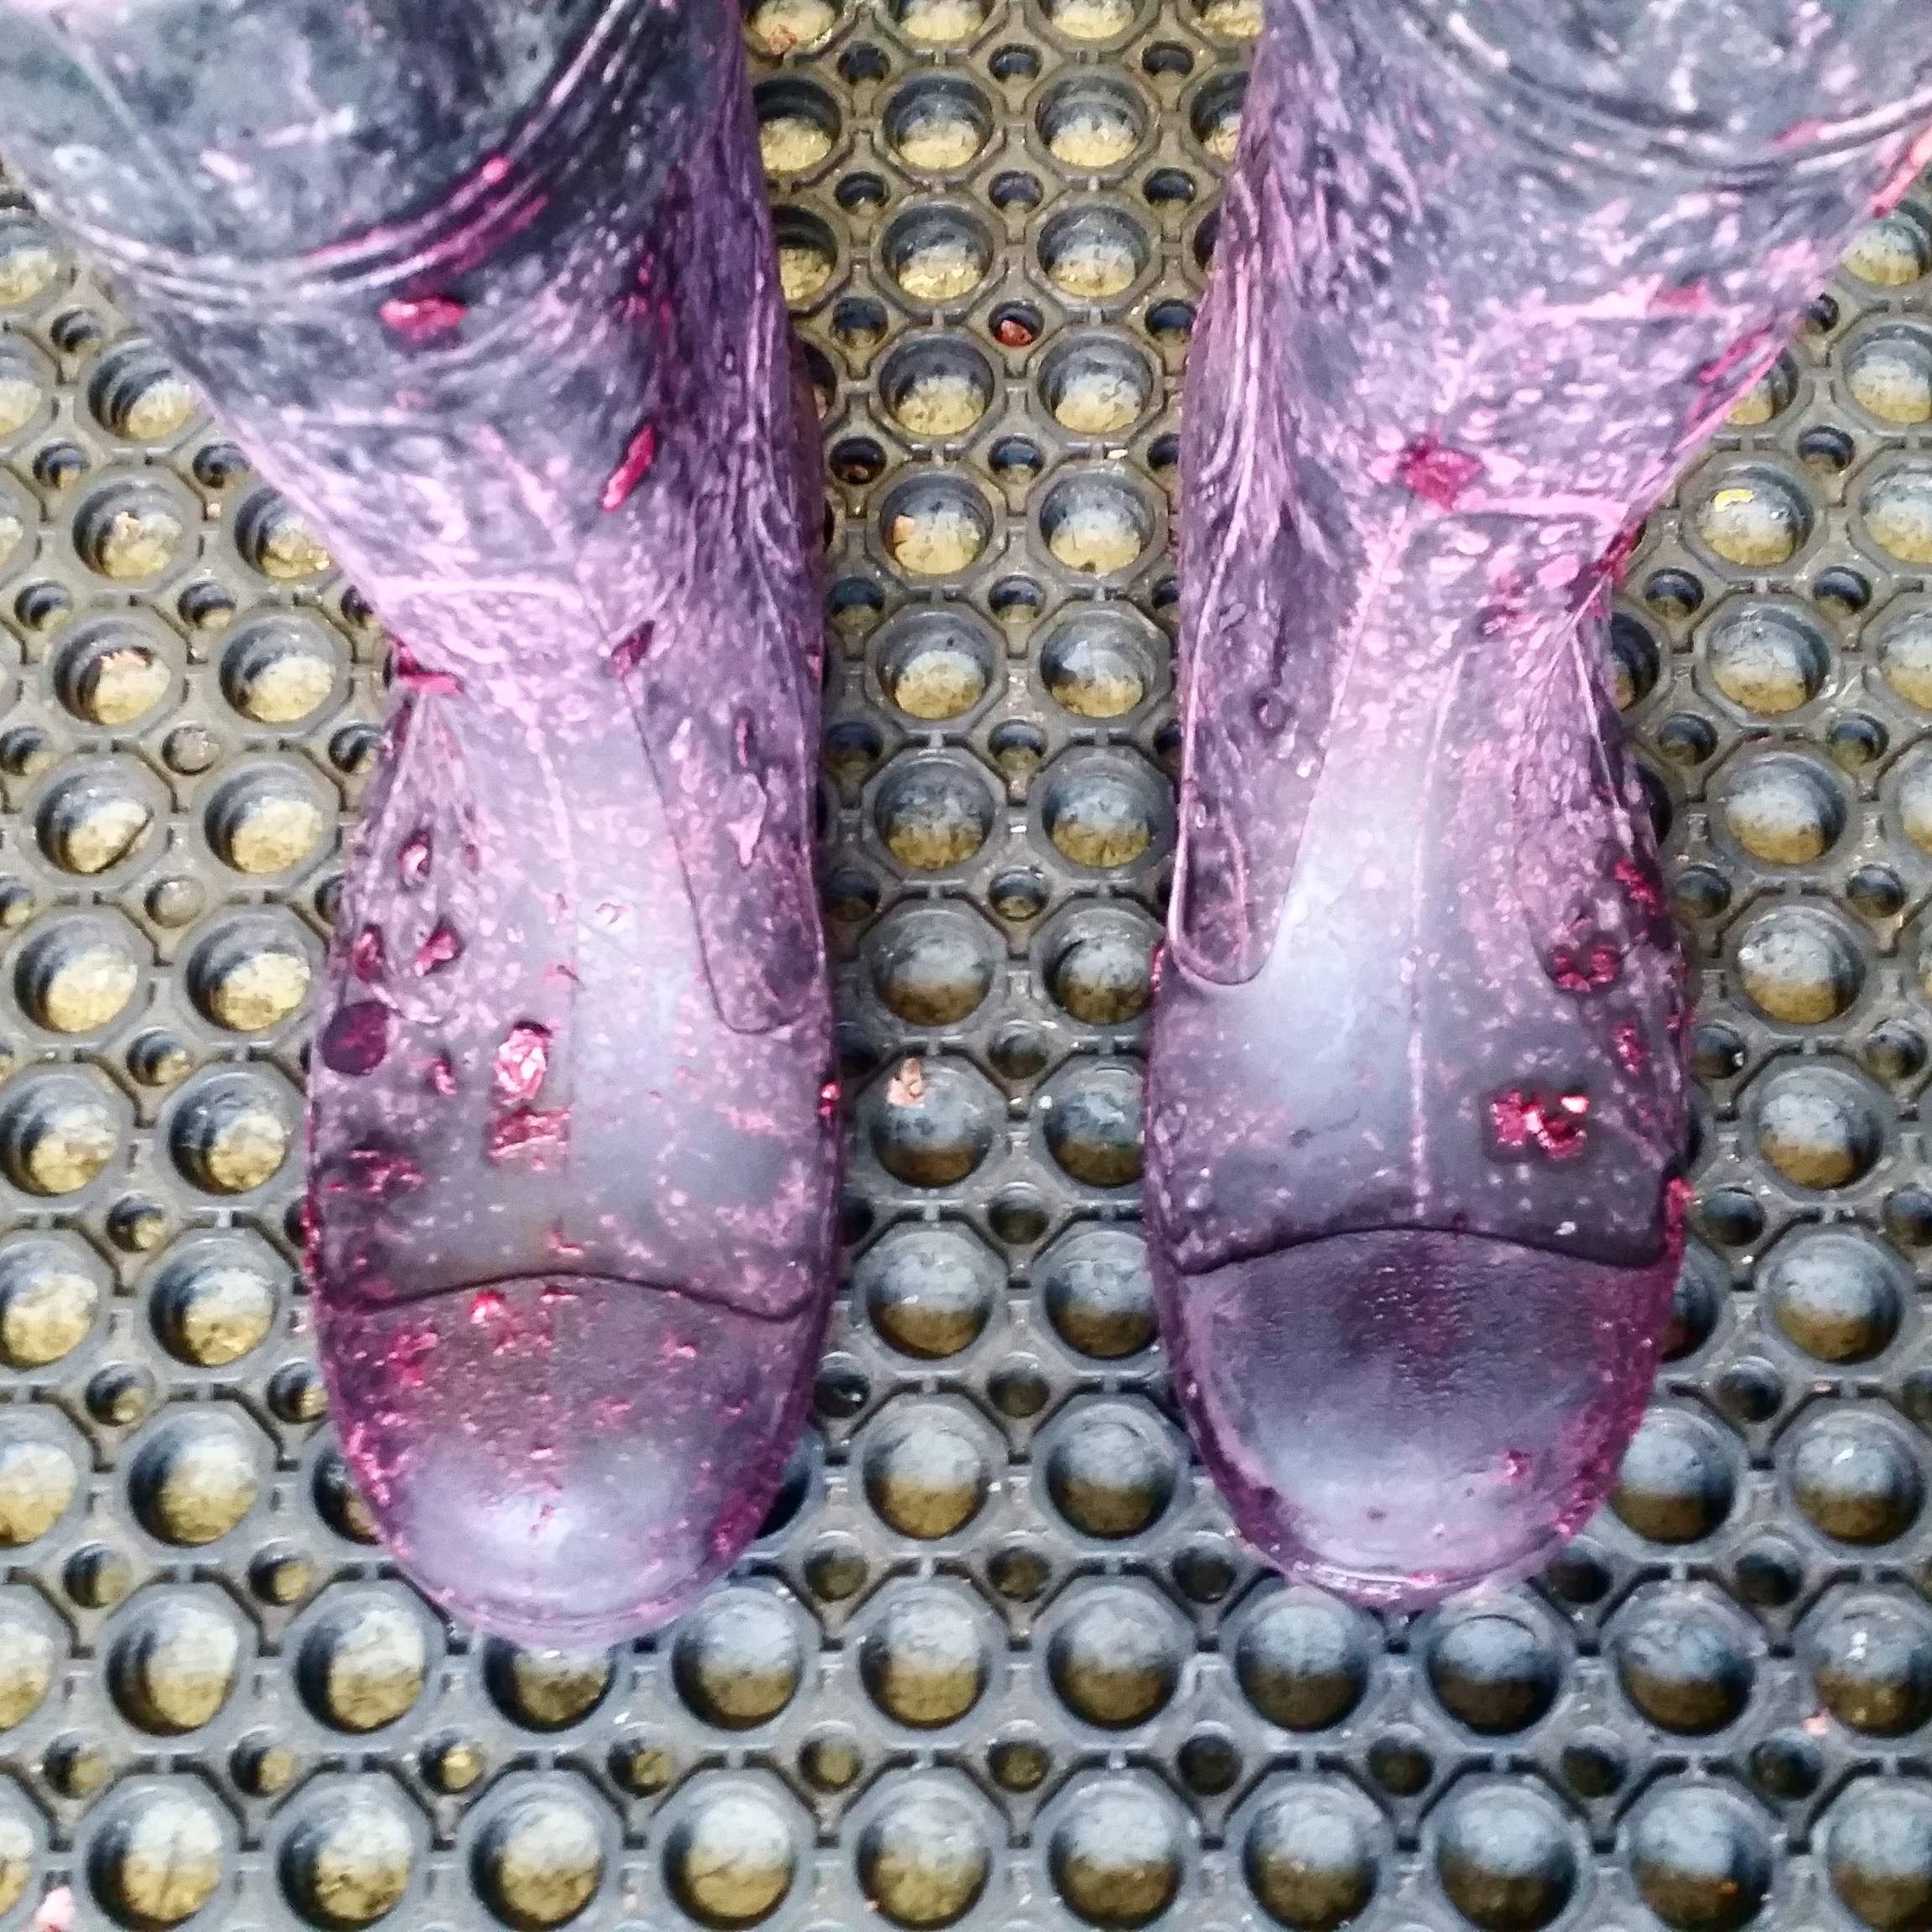 Rubber boots covered in grapes